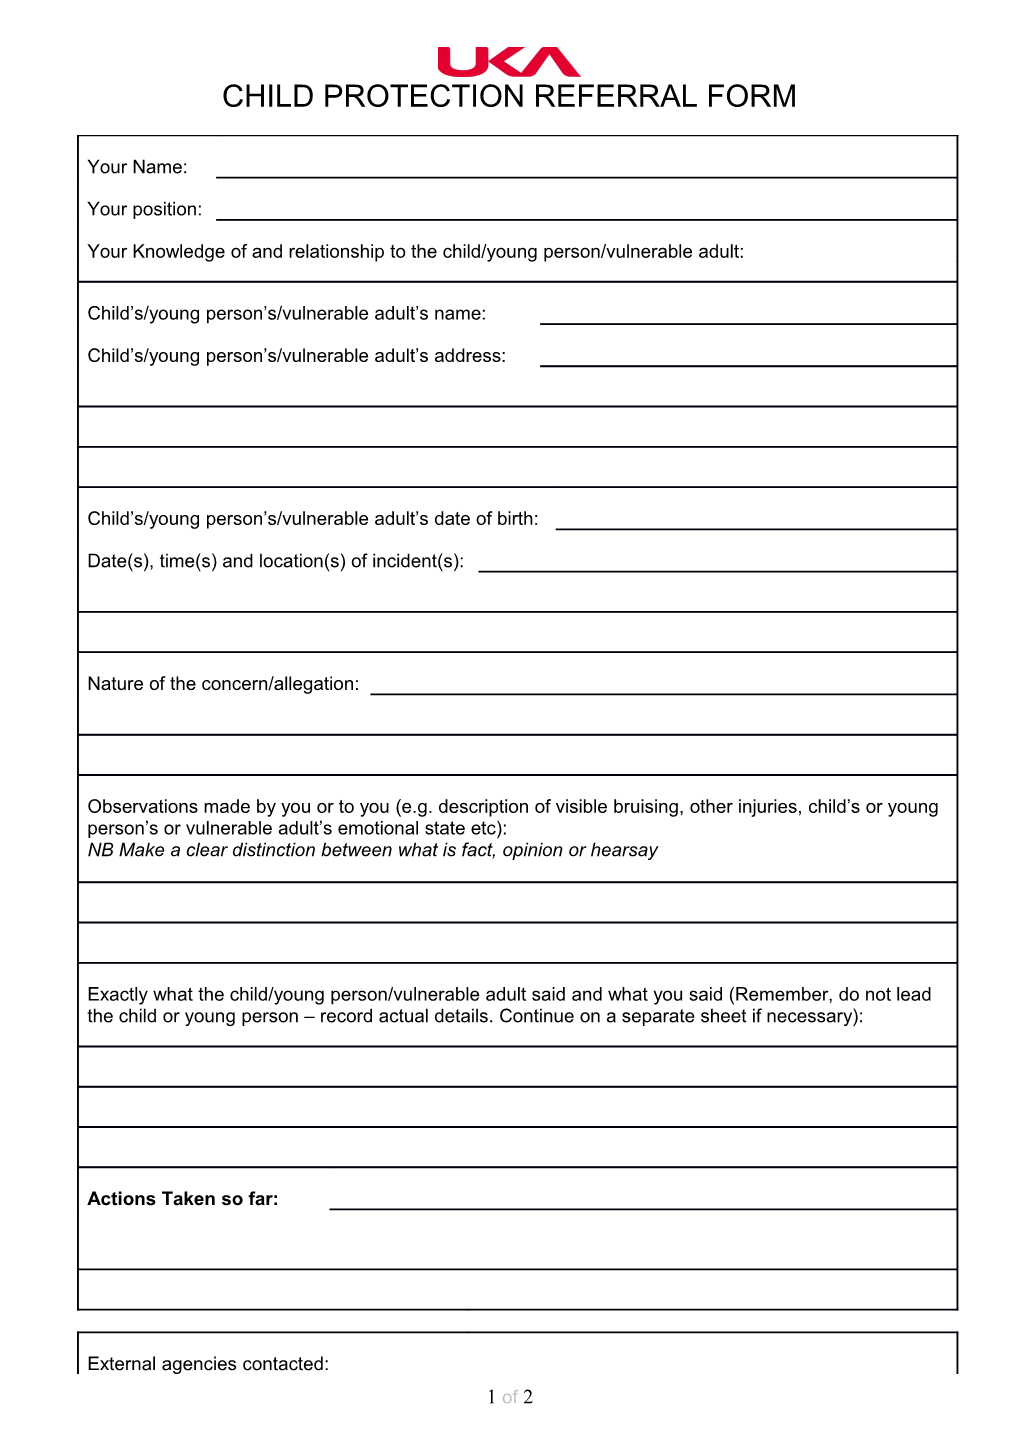 Child Protection Referral Form